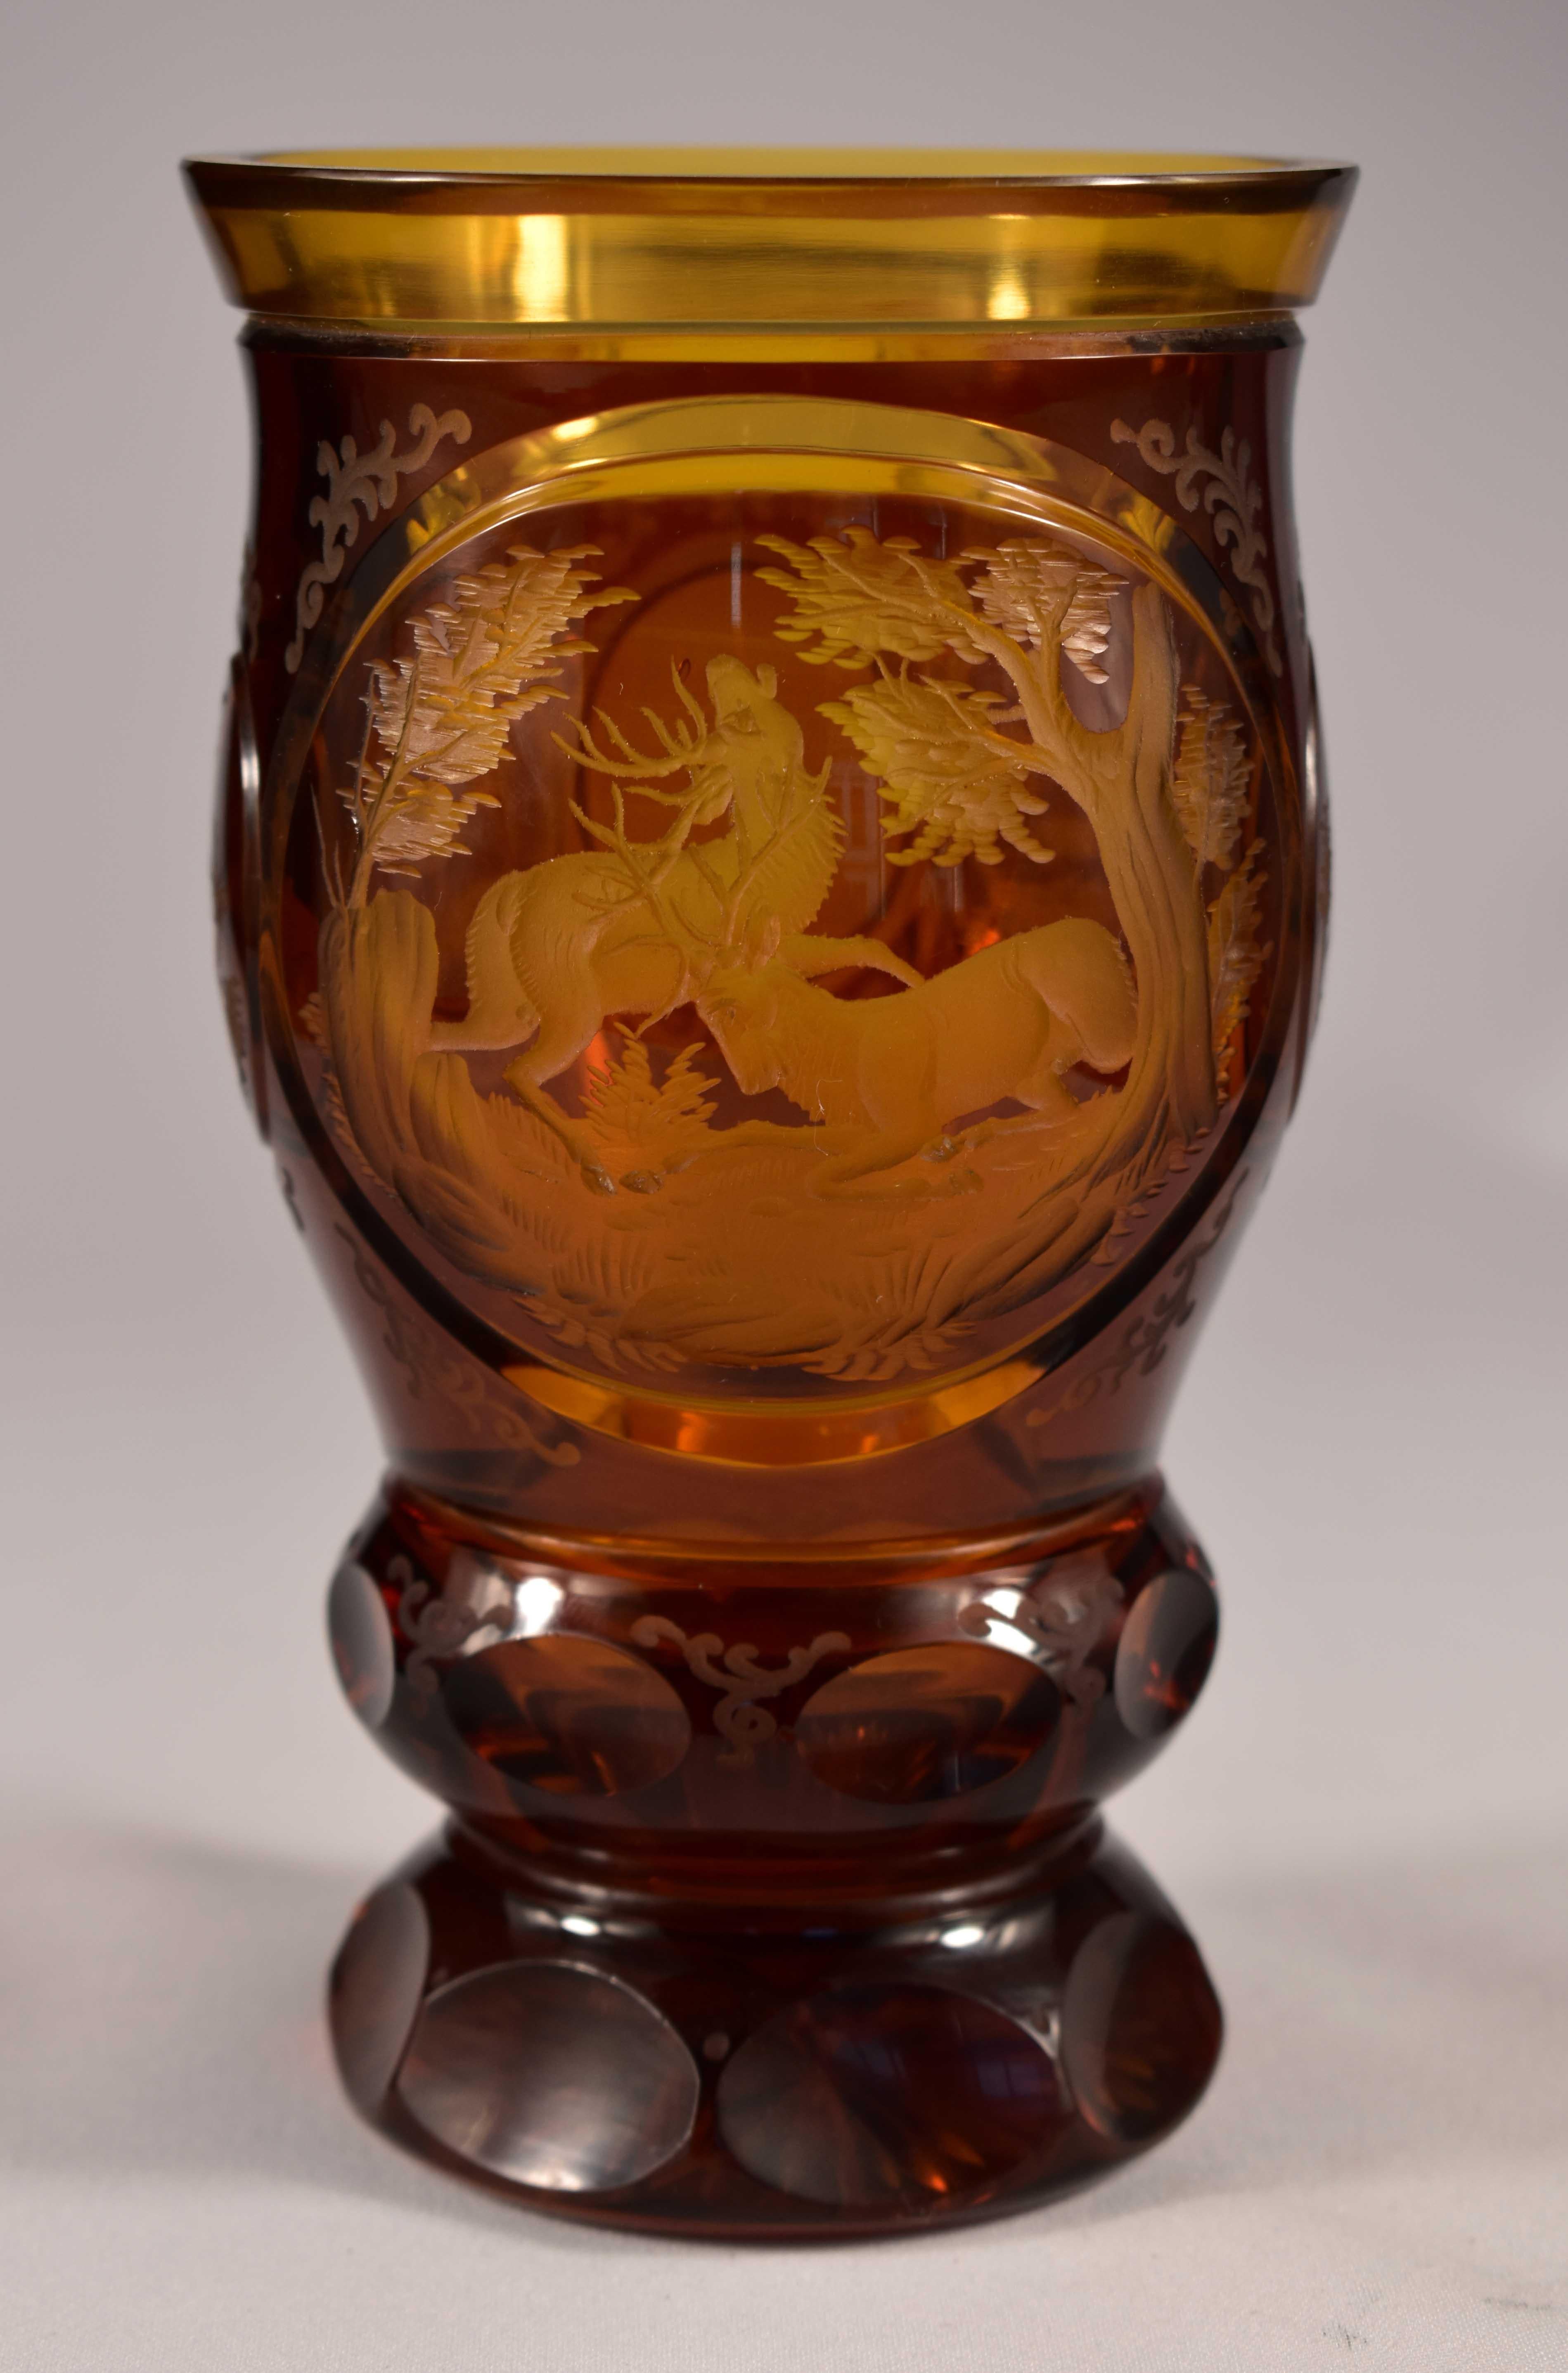 Beautiful goblet made of amber glass, engraving with a hunting motif, 20th century Bohemian Glass- Undamaged.